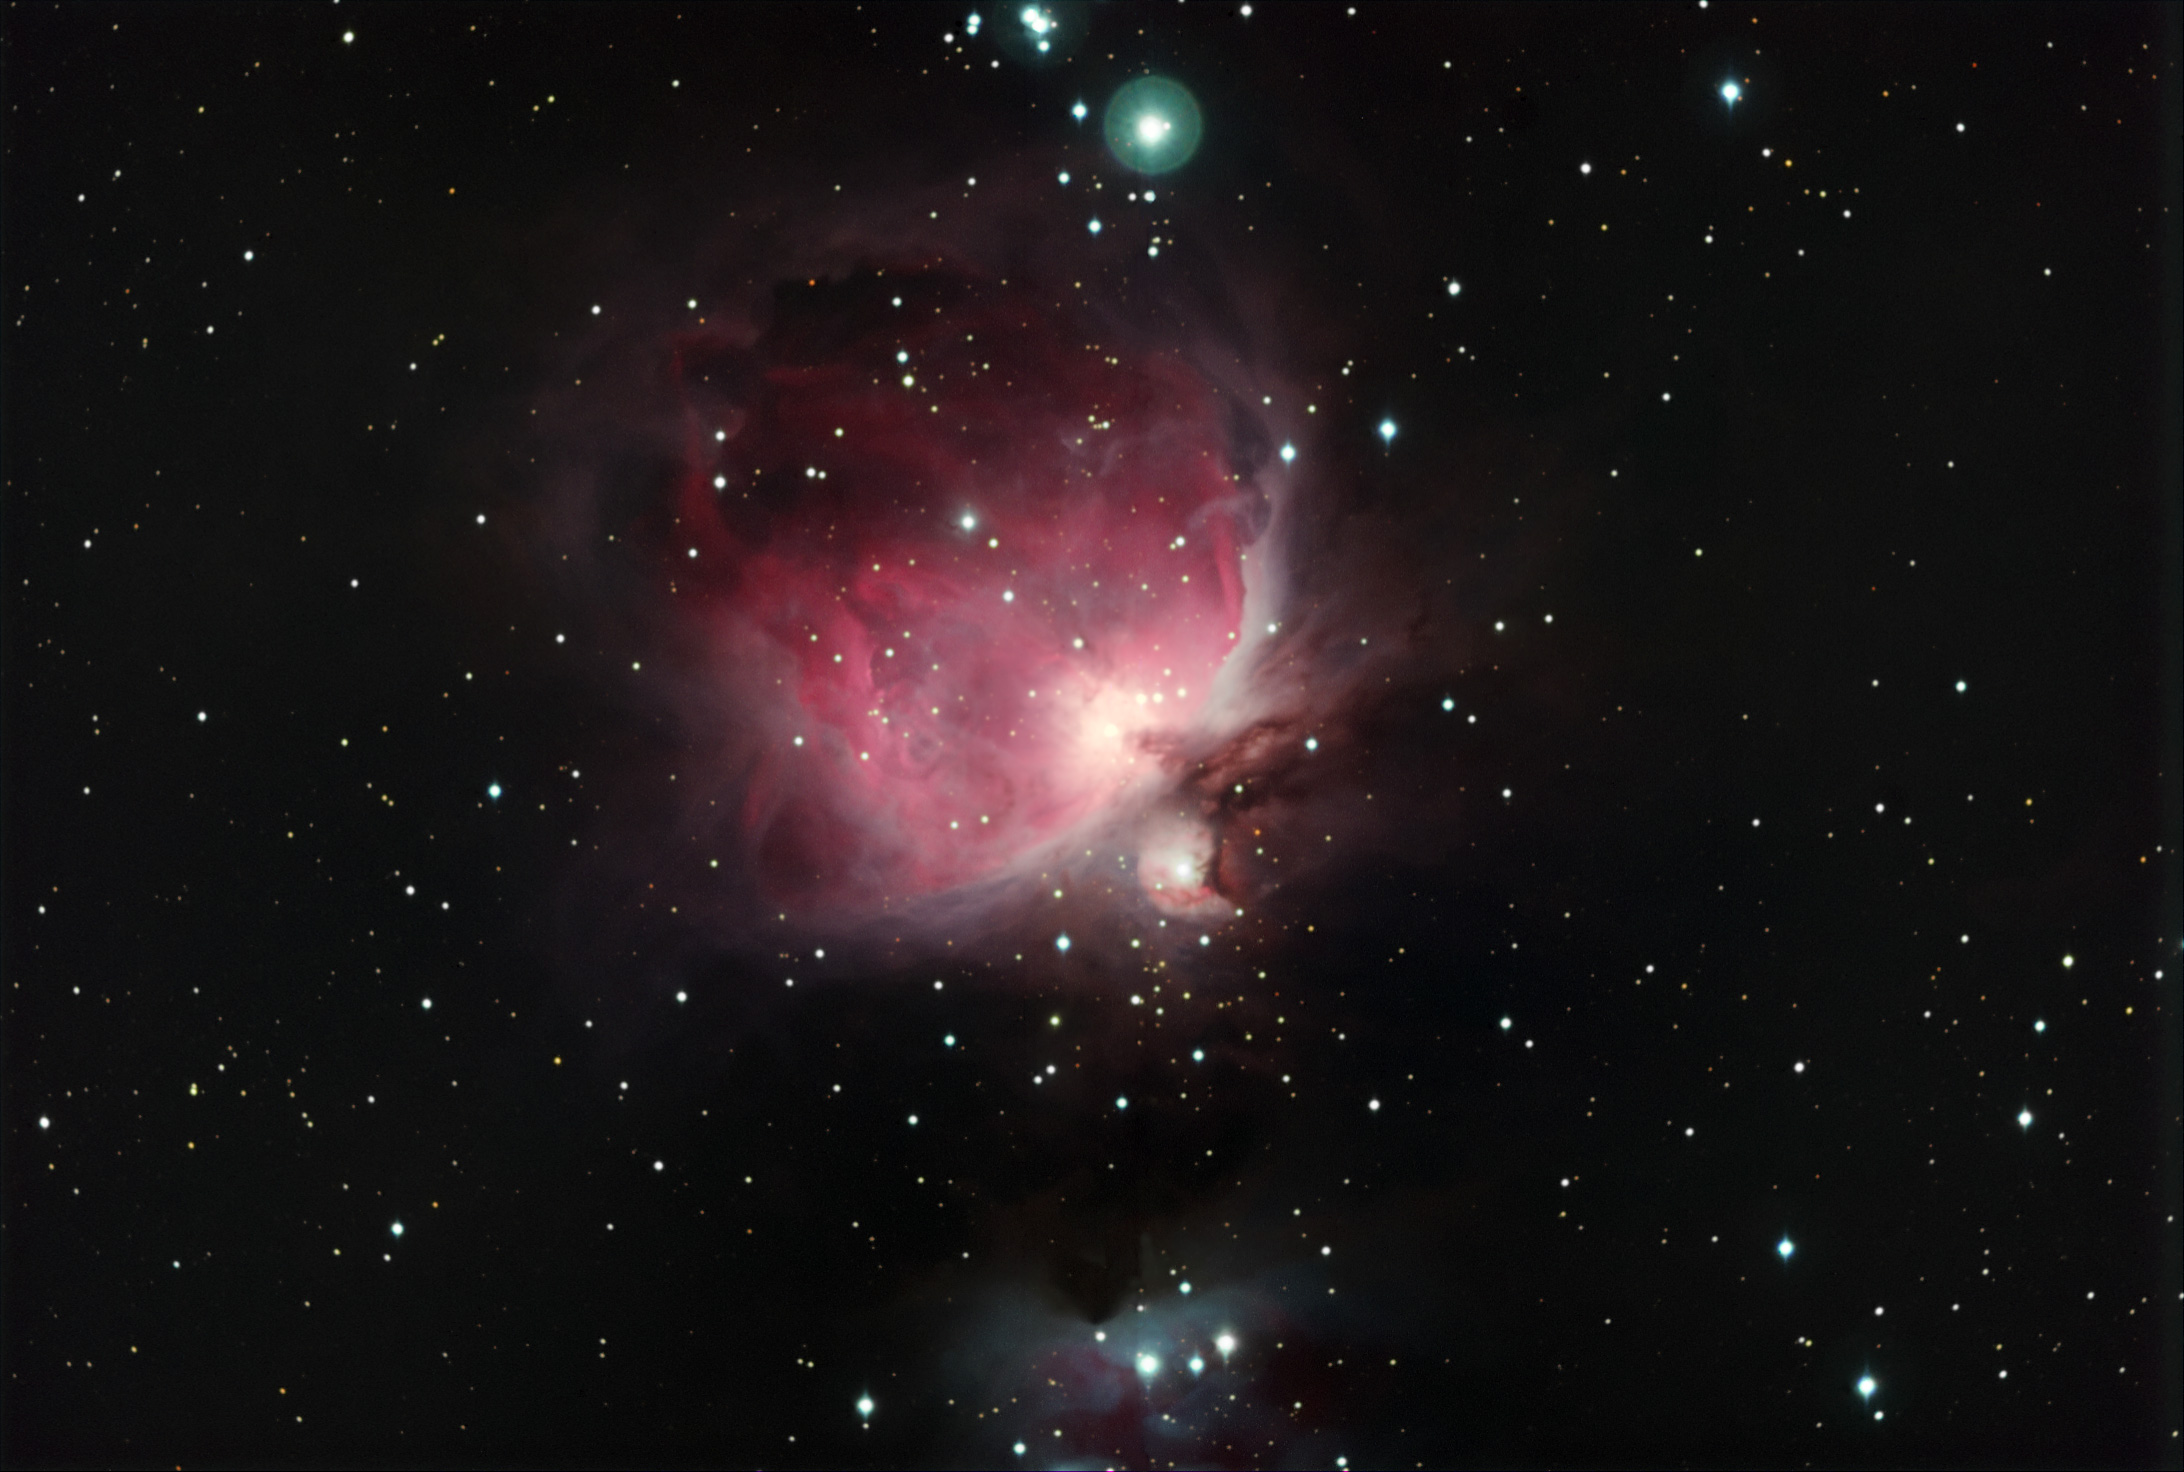 M42 in Orion